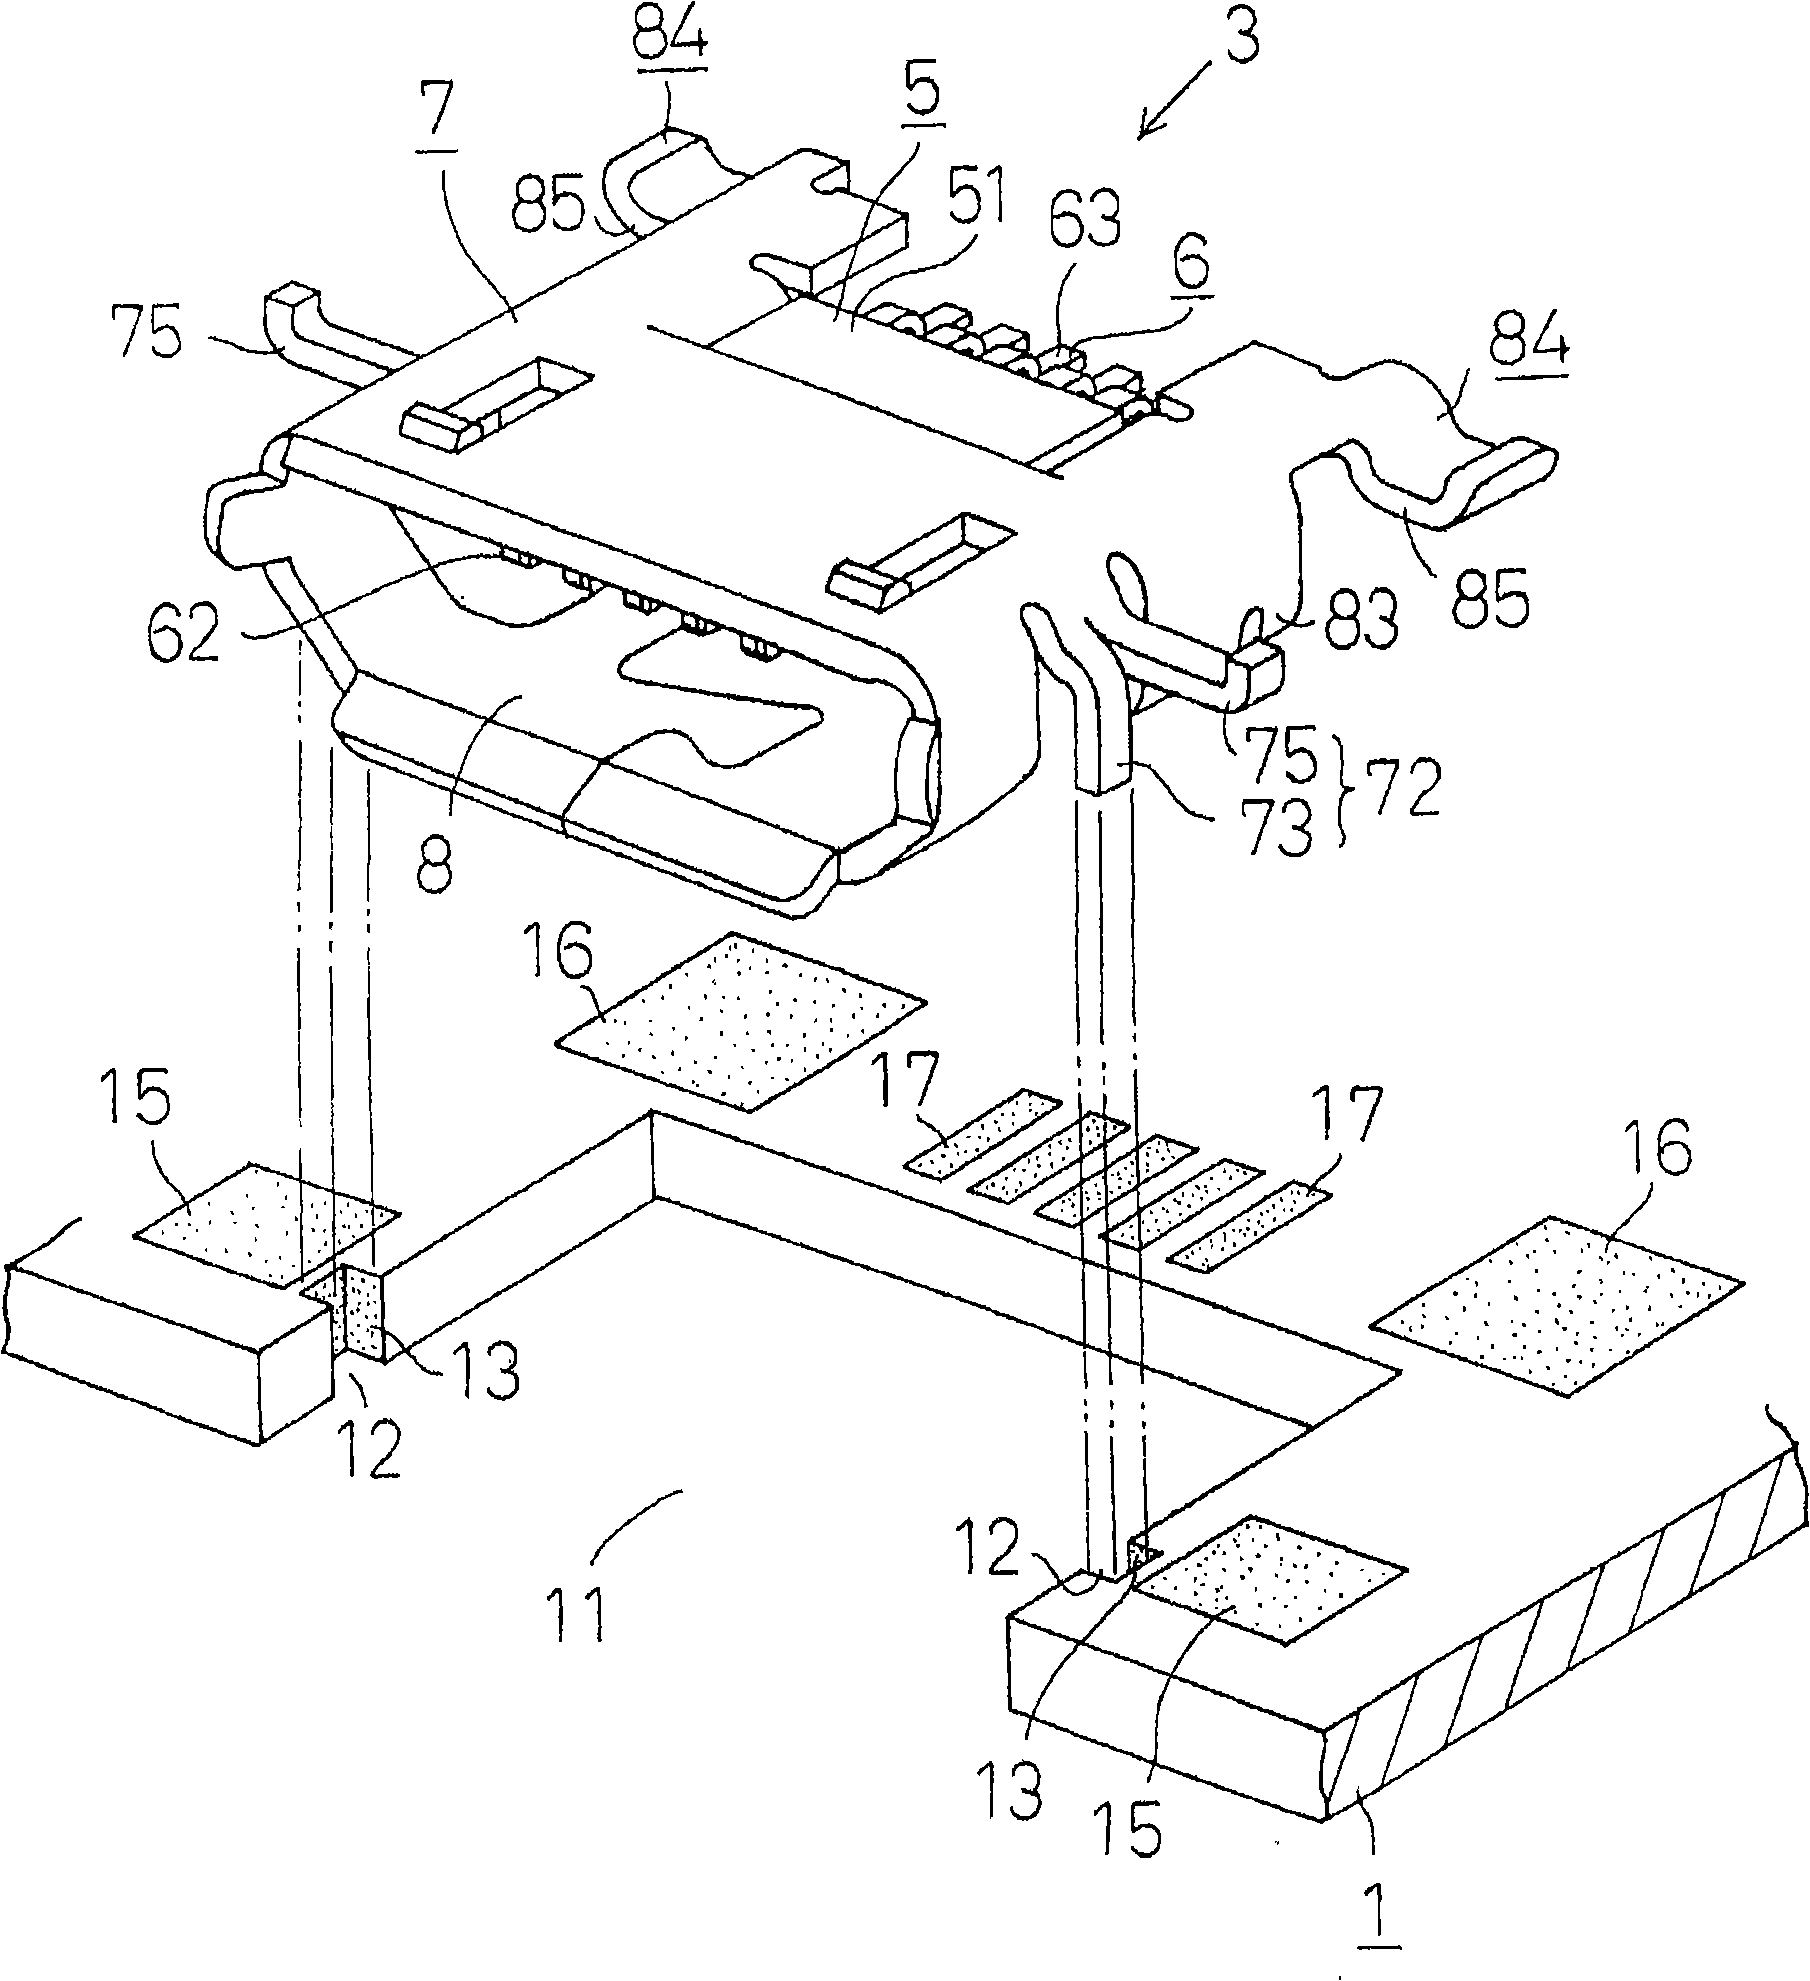 Welding connection structure of terminal of electronic device and printed circuit board